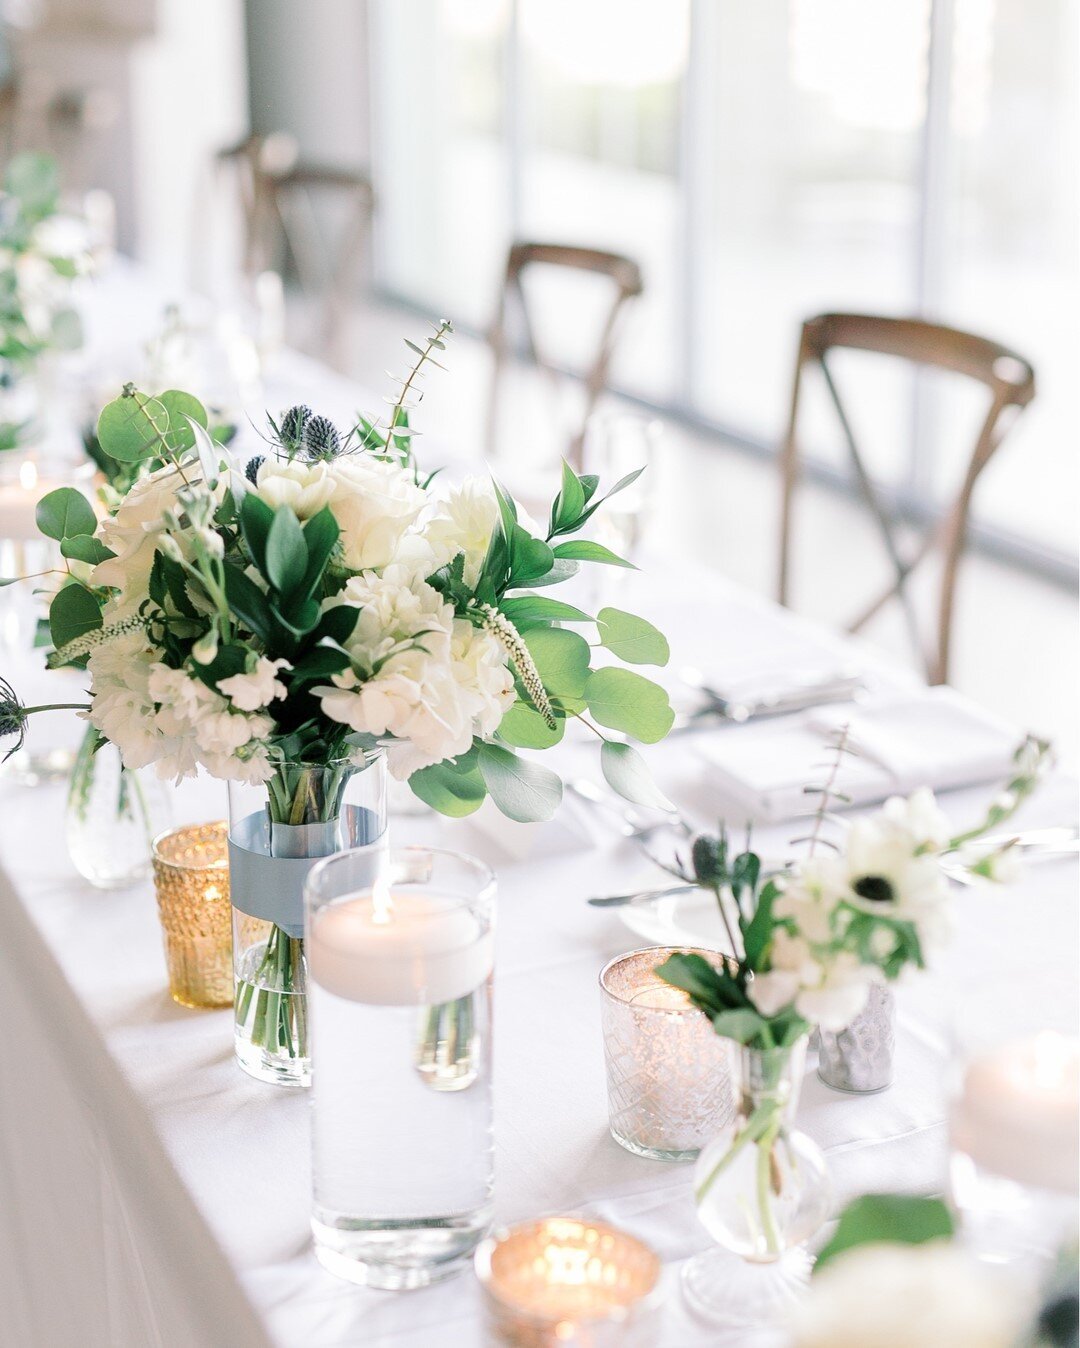 Are you doing a head table for your wedding? Head tables are a great, social edition to your reception layout that give your wedding party the opportunity to chat &amp; be merry together, especially when you have a smaller party!⠀⠀⠀⠀⠀⠀⠀⠀⠀
⠀⠀⠀⠀⠀⠀⠀⠀⠀
Shot for @photographymadisonbanks⠀⠀⠀⠀⠀⠀⠀⠀⠀
⠀⠀⠀⠀⠀⠀⠀⠀⠀
#charlestonwedding⠀⠀⠀⠀⠀⠀⠀⠀⠀
#charlestonbride⠀⠀⠀⠀⠀⠀⠀⠀⠀
#charlestonweddingphotographer⠀⠀⠀⠀⠀⠀⠀⠀⠀
#bestcharlestonphotographer⠀⠀⠀⠀⠀⠀⠀⠀⠀
#bestcharlestonweddingphotographer⠀⠀⠀⠀⠀⠀⠀⠀⠀
#hiltonheadweddingphotographer⠀⠀⠀⠀⠀⠀⠀⠀⠀
#hiltonheadphotographer⠀⠀⠀⠀⠀⠀⠀⠀⠀
#blufftonweddingphotographer⠀⠀⠀⠀⠀⠀⠀⠀⠀
#montagepalmettobluff⠀⠀⠀⠀⠀⠀⠀⠀⠀
#charlestonengagementphotos⠀⠀⠀⠀⠀⠀⠀⠀⠀
#charlestonweddingplanner⠀⠀⠀⠀⠀⠀⠀⠀⠀
#charlestonbridetobe⠀⠀⠀⠀⠀⠀⠀⠀⠀
#charlestonengagement⠀⠀⠀⠀⠀⠀⠀⠀⠀
#charlestonengagementphotographer⠀⠀⠀⠀⠀⠀⠀⠀⠀
#charlestonweddings⠀⠀⠀⠀⠀⠀⠀⠀⠀
#southcarolinaphotographer⠀⠀⠀⠀⠀⠀⠀⠀⠀
#greenvilleweddingphotographer⠀⠀⠀⠀⠀⠀⠀⠀⠀
#columbiaweddingphotographer⠀⠀⠀⠀⠀⠀⠀⠀⠀
#luxuryweddings⠀⠀⠀⠀⠀⠀⠀⠀⠀
#highendweddingphotography⠀⠀⠀⠀⠀⠀⠀⠀⠀
#